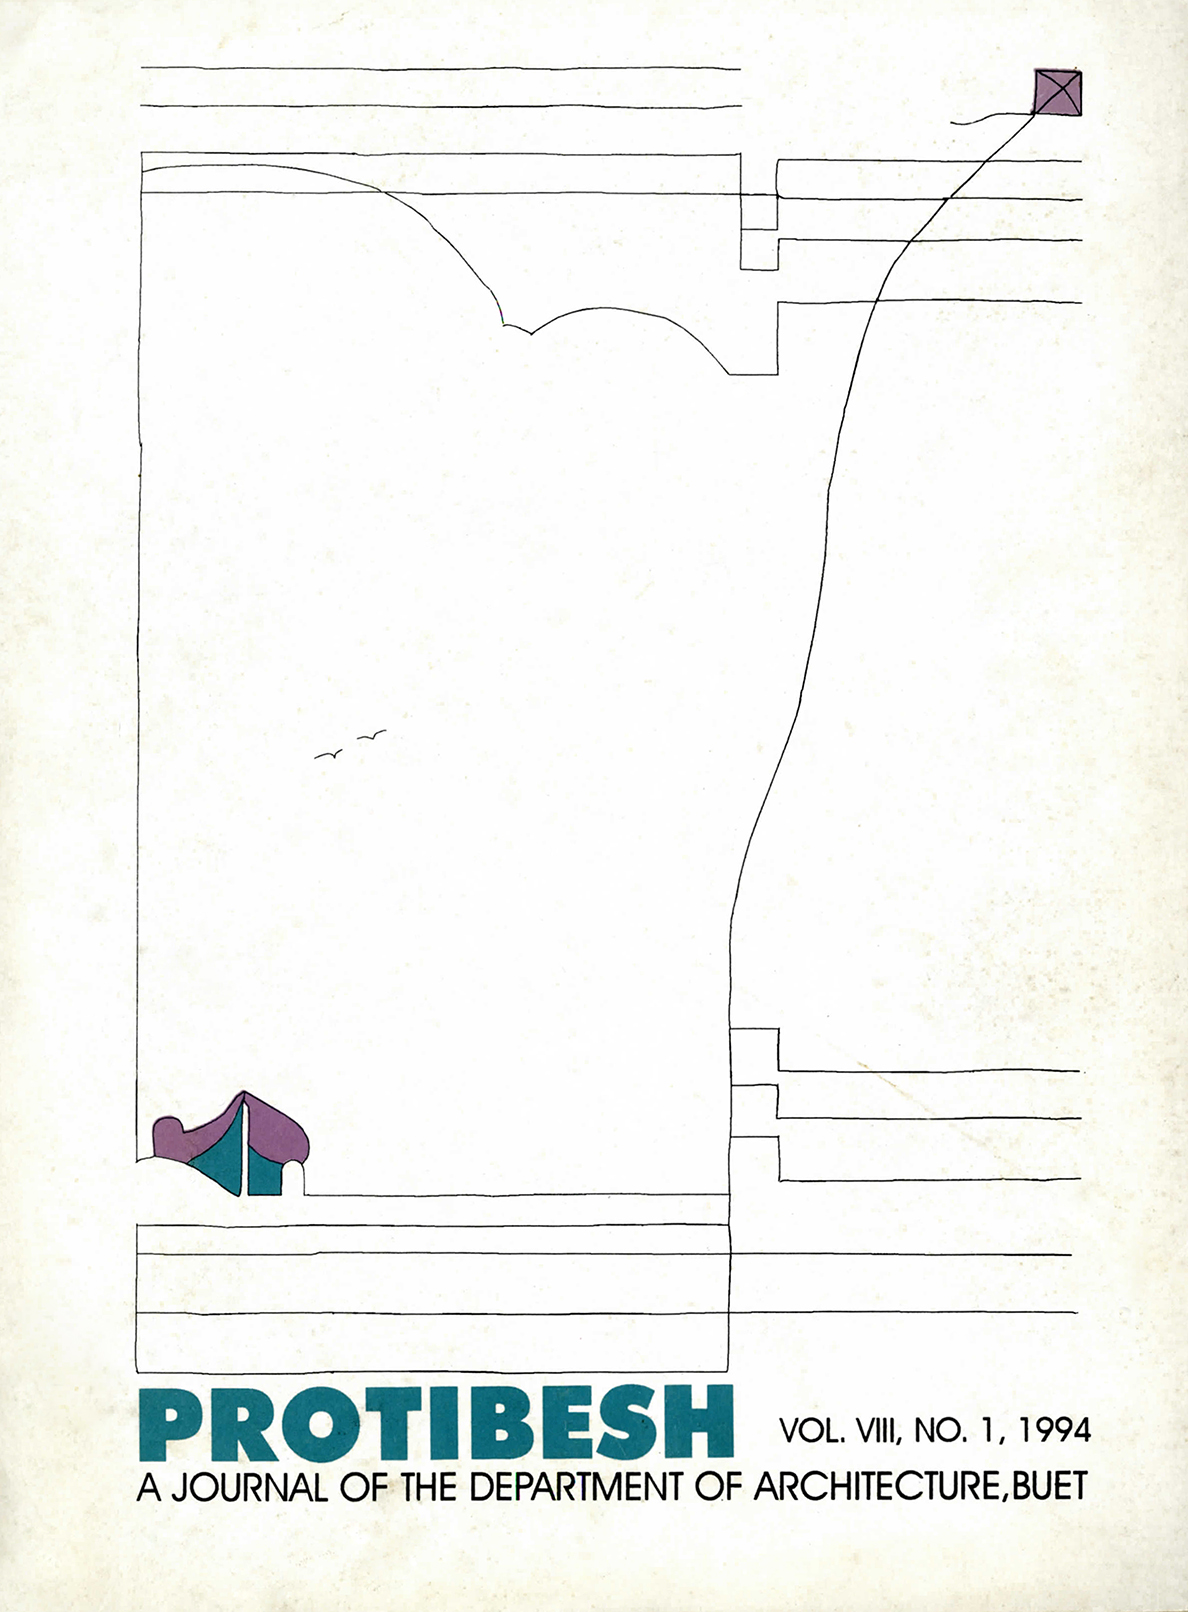 Cover image of Protibesh Vol-08 No-01 1994 - Journal of the Department of Architecture, BUET